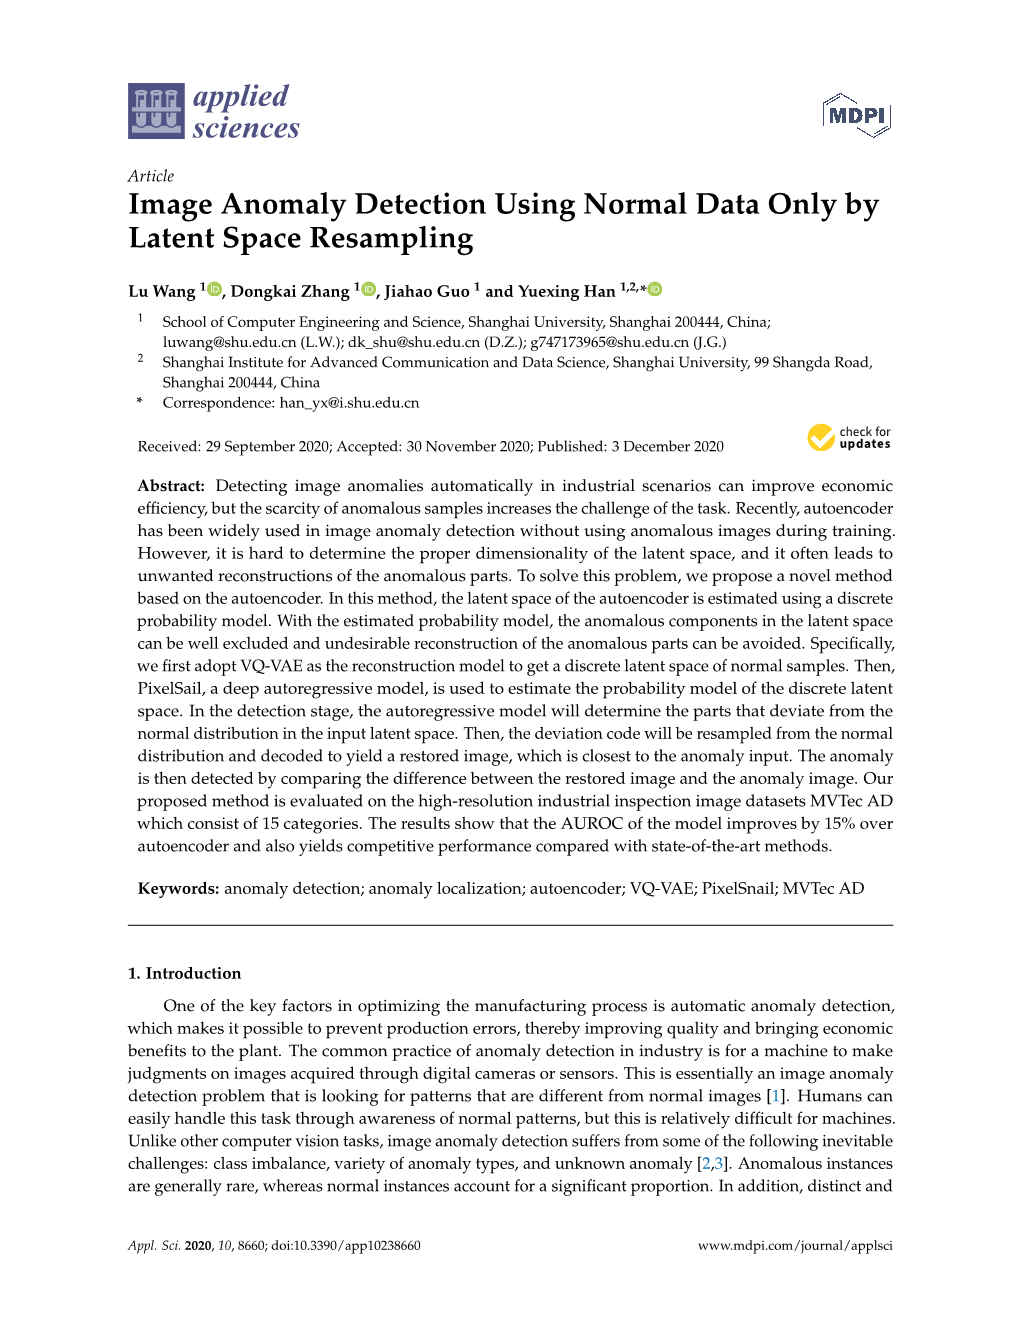 Image Anomaly Detection Using Normal Data Only by Latent Space Resampling